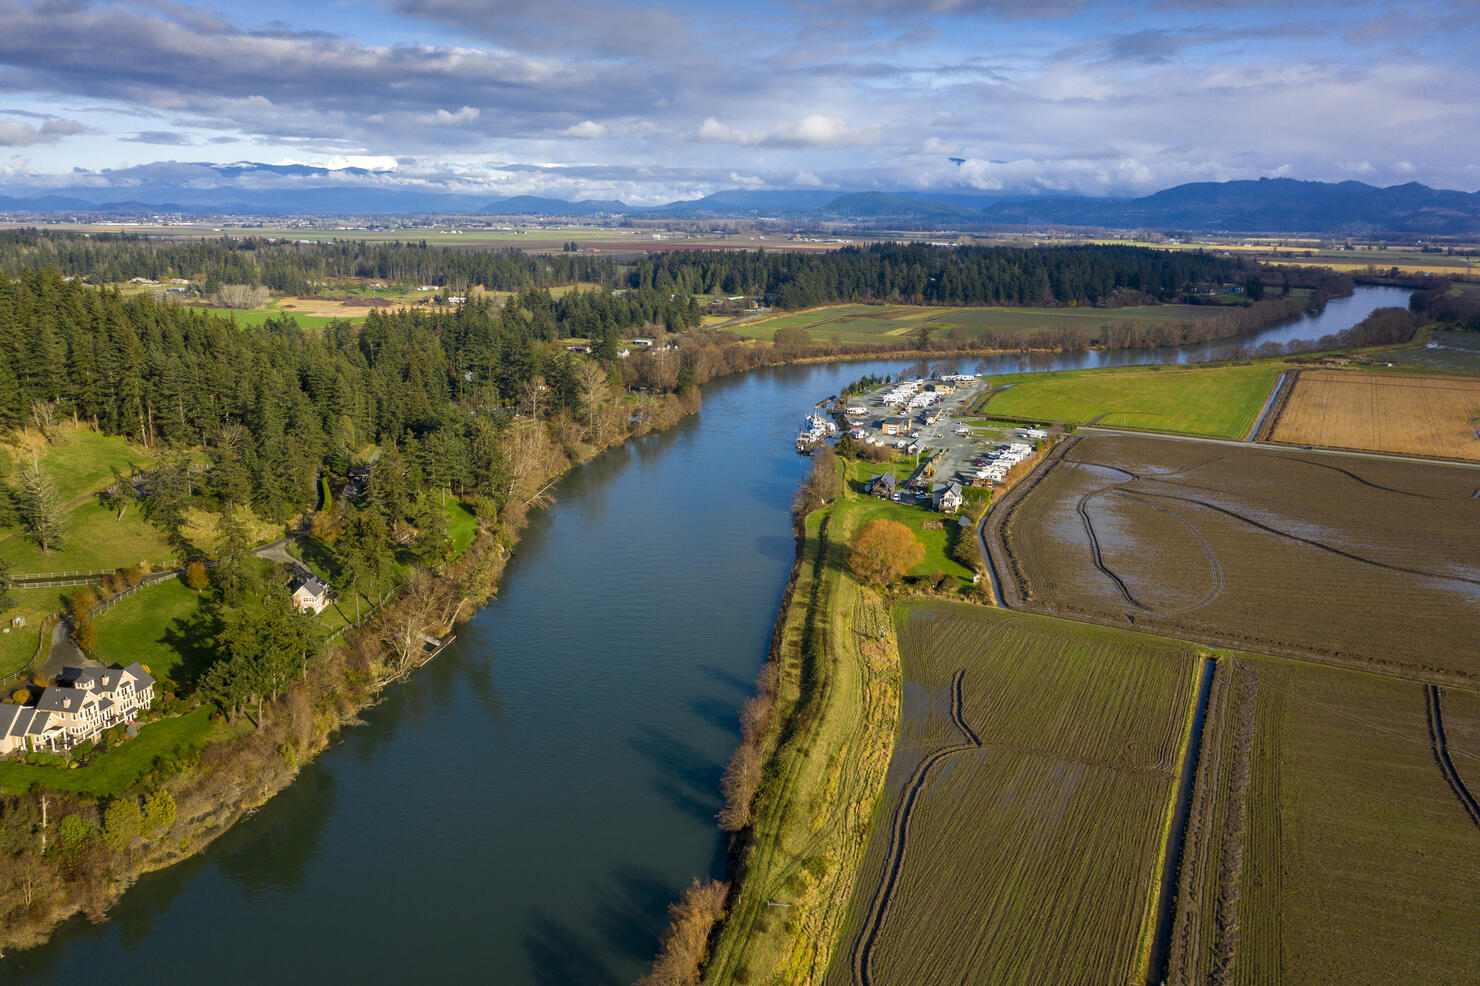 The Skagit Valley lies in the northwestern corner of the state of Washington.